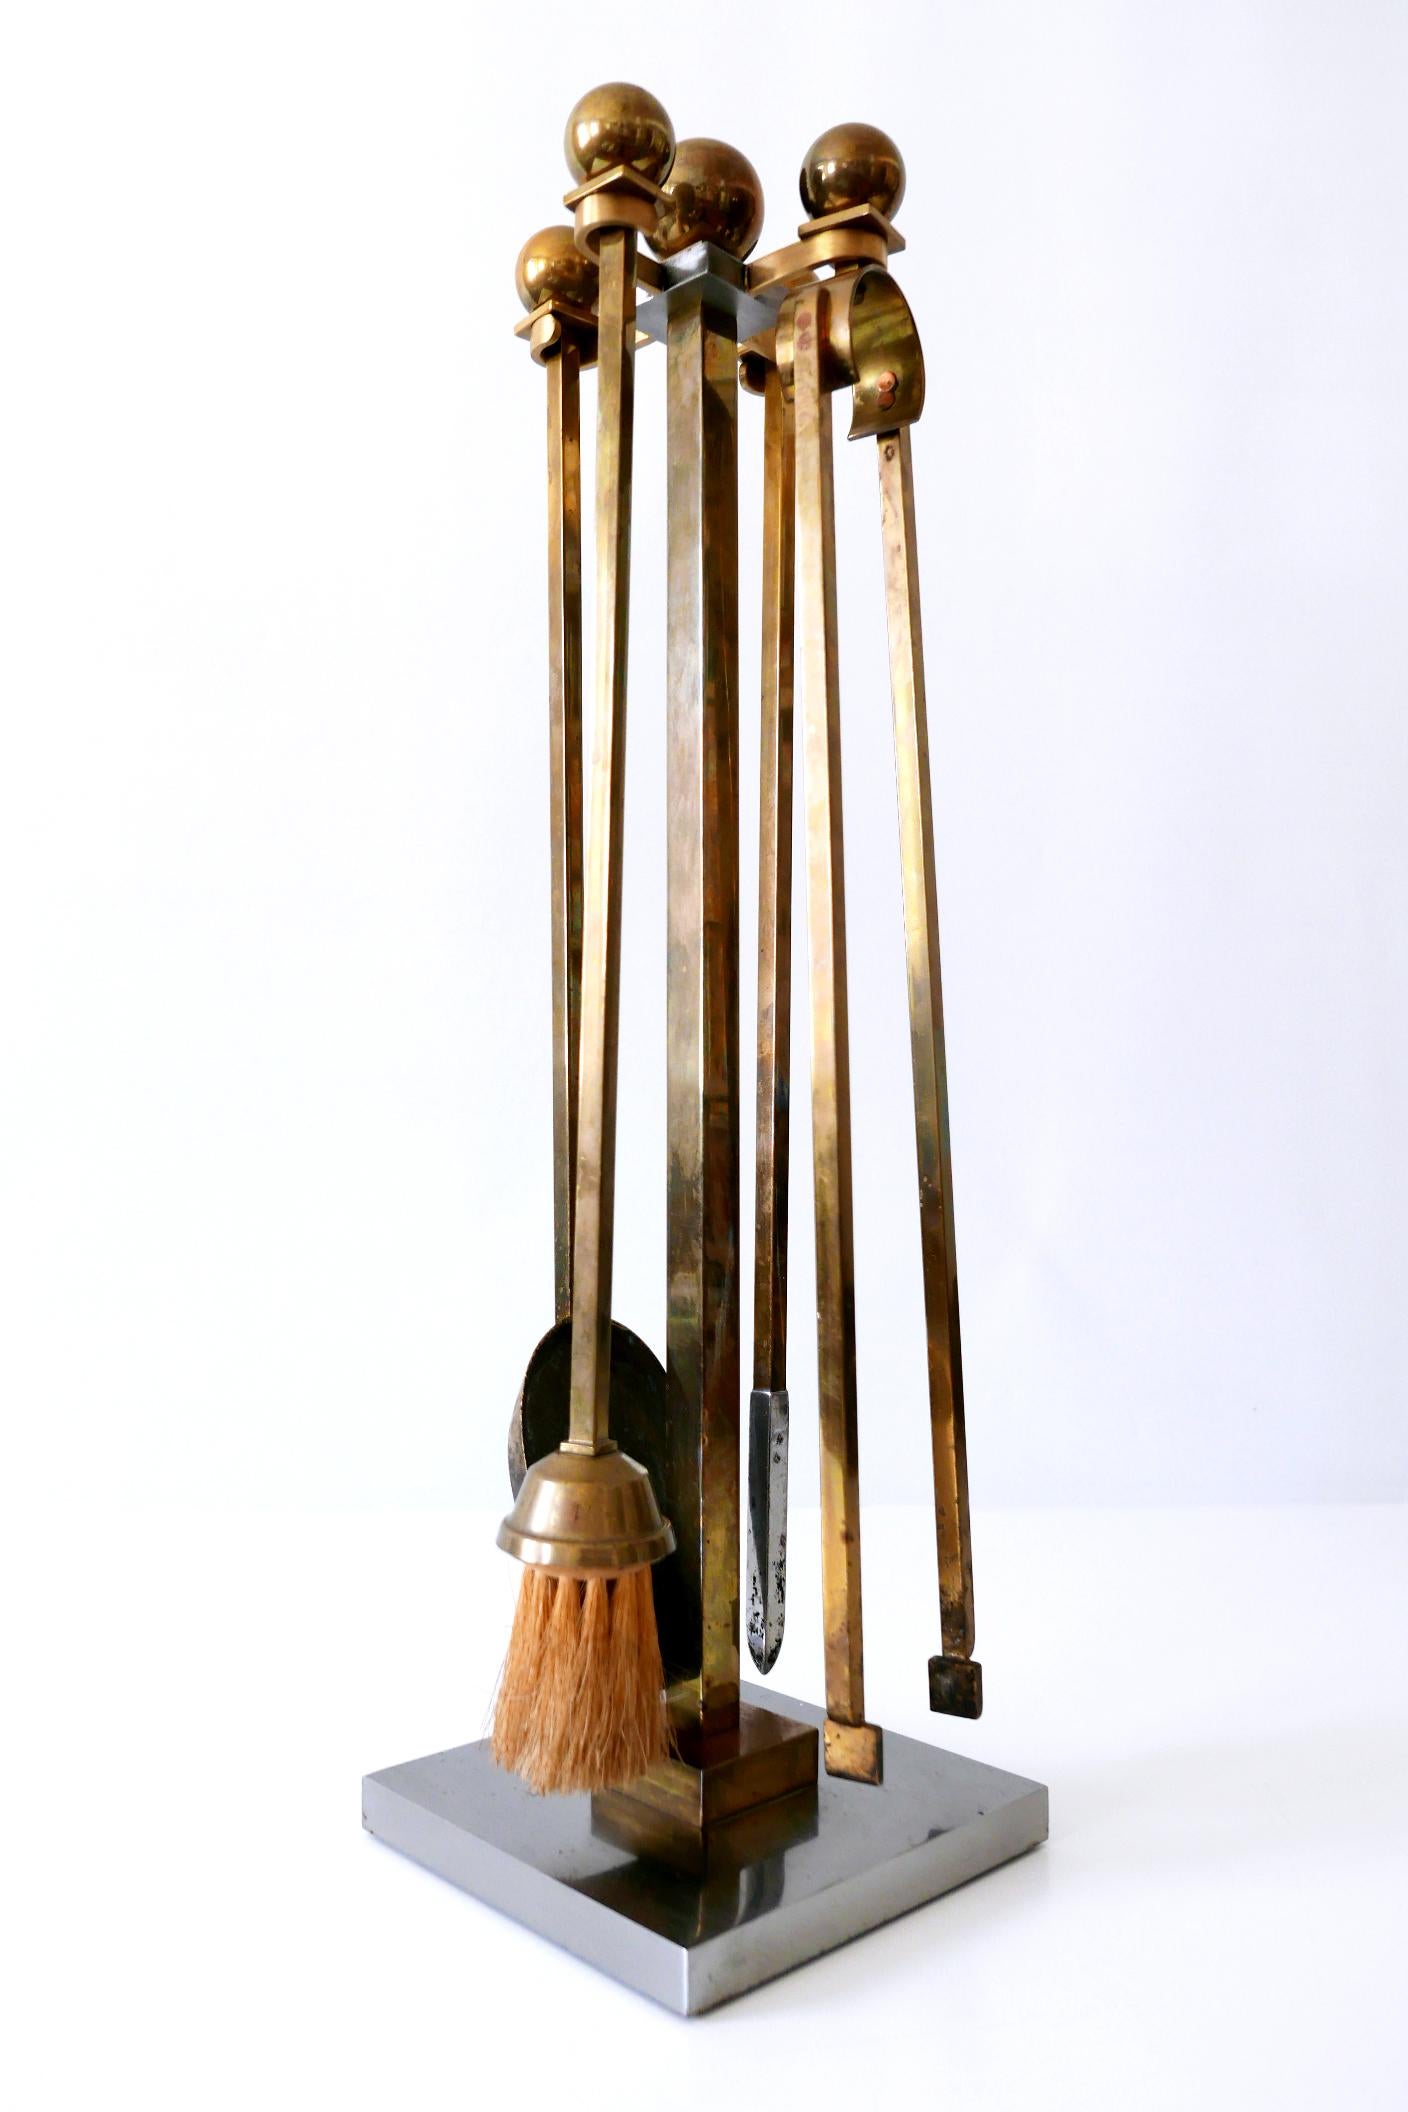 German Exceptional Mid-Century Modern Brass and Steel Fireplace Tools 1970s For Sale